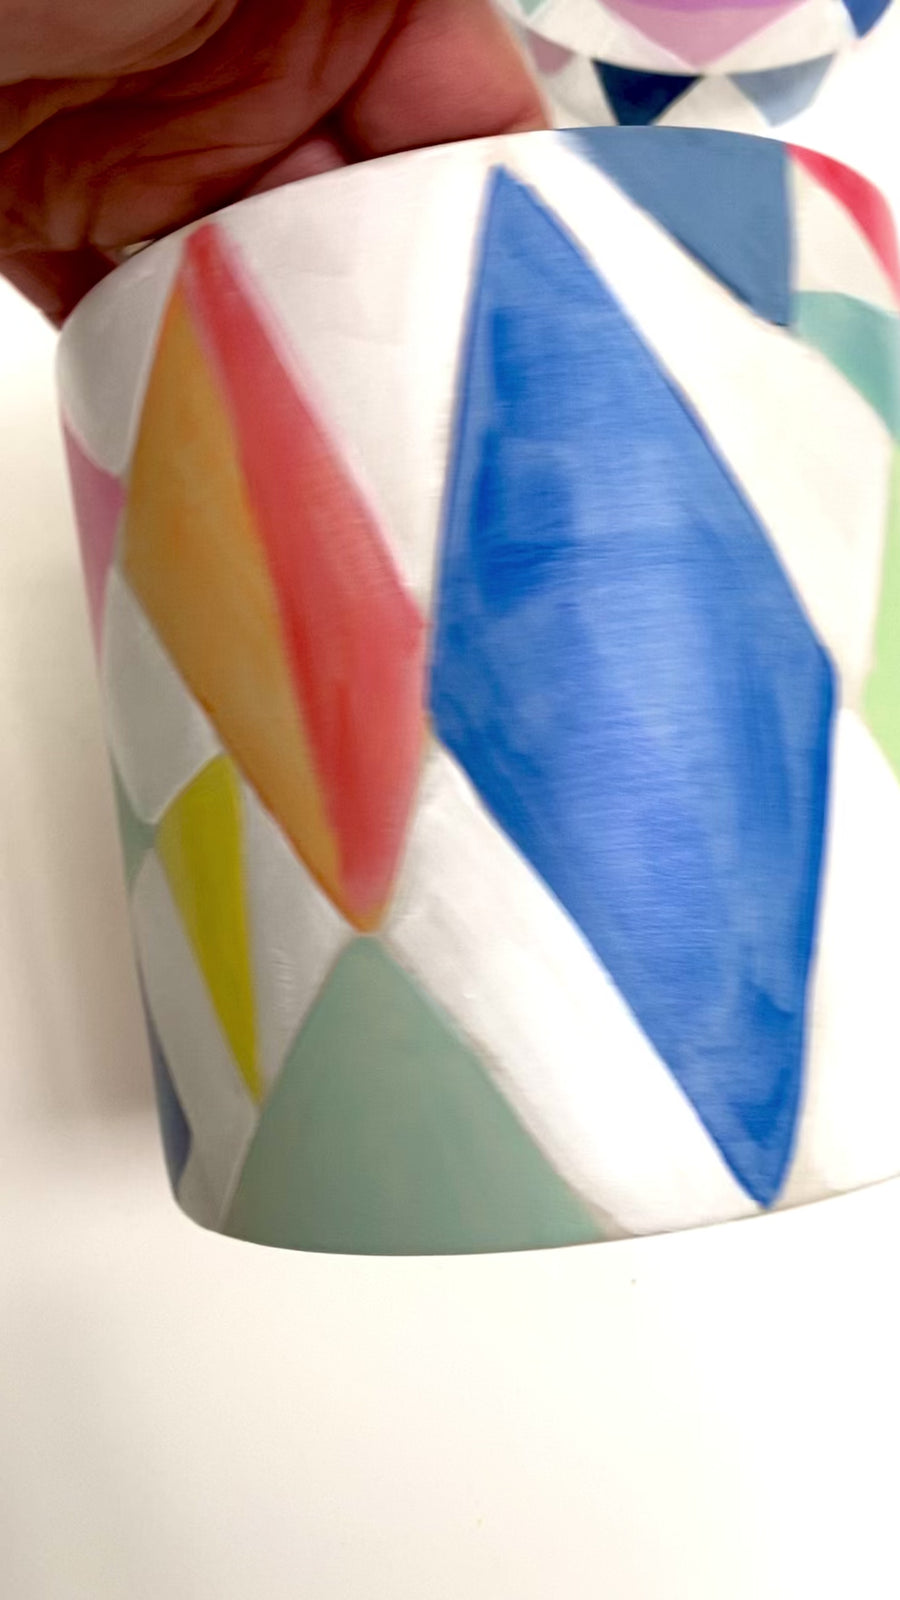 Clare Whitney Hand Painted Ceramic Pot